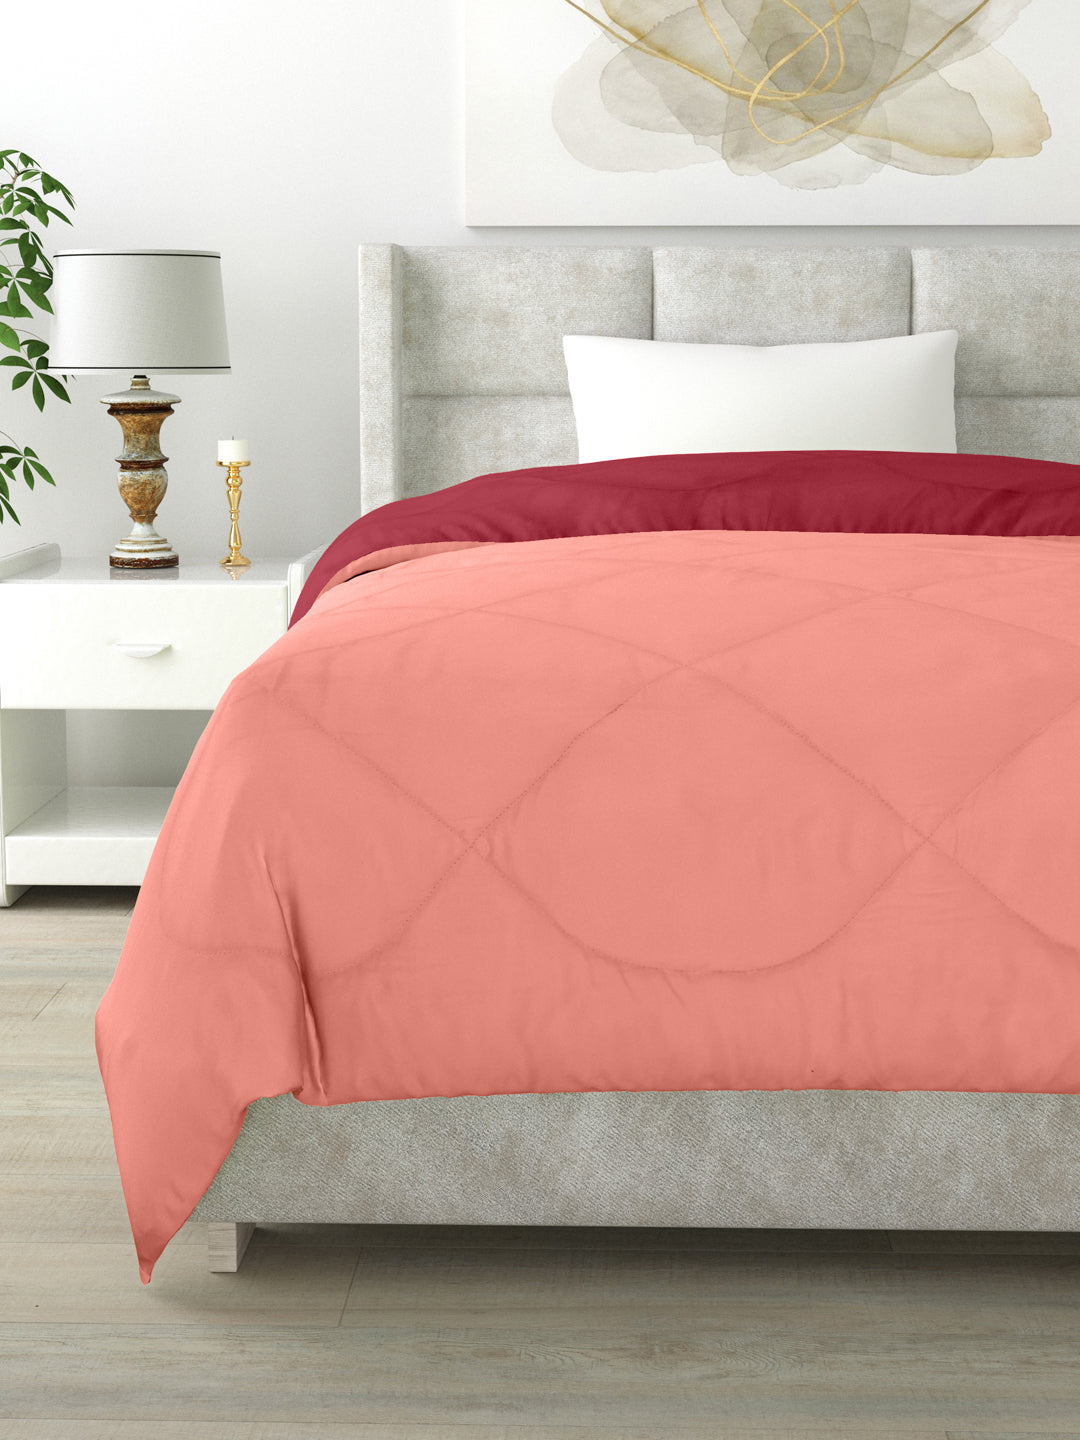 Reversible Single Bed Comforter 200 GSM 60x90 Inches (Candy Peach & Maroon)